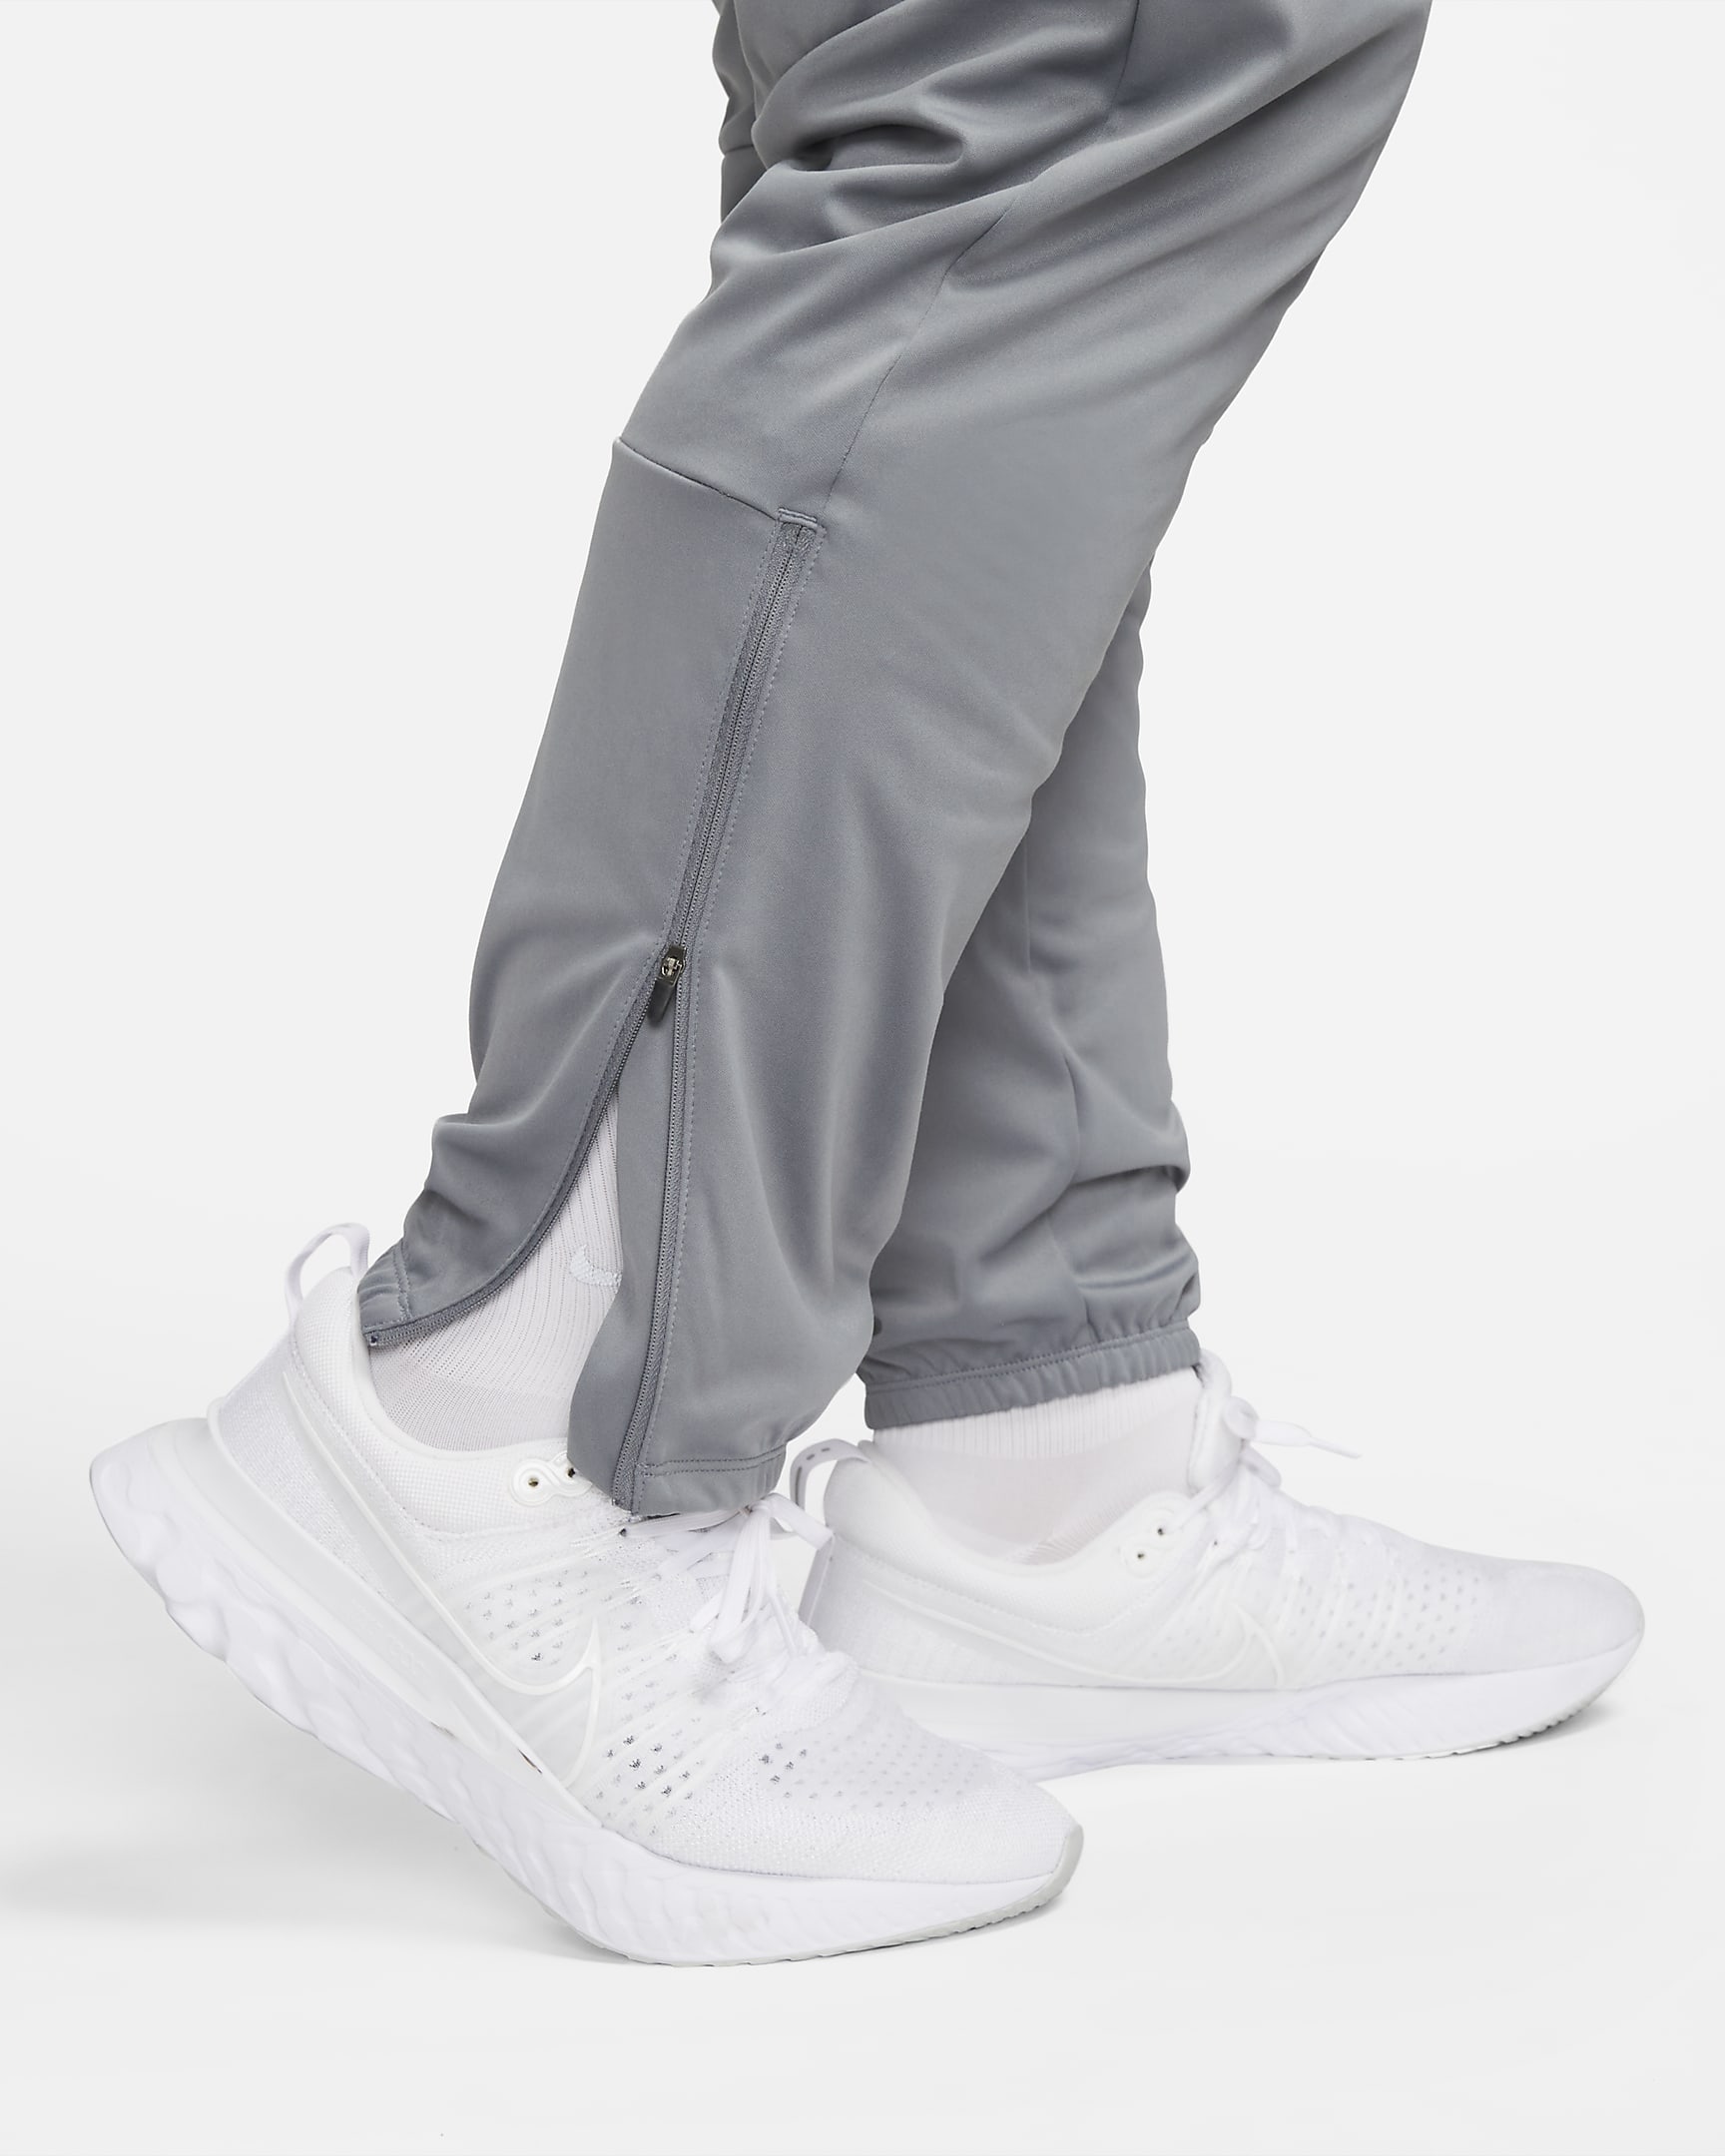 Nike Dri-FIT Challenger Men's Knit Running Trousers. Nike AT